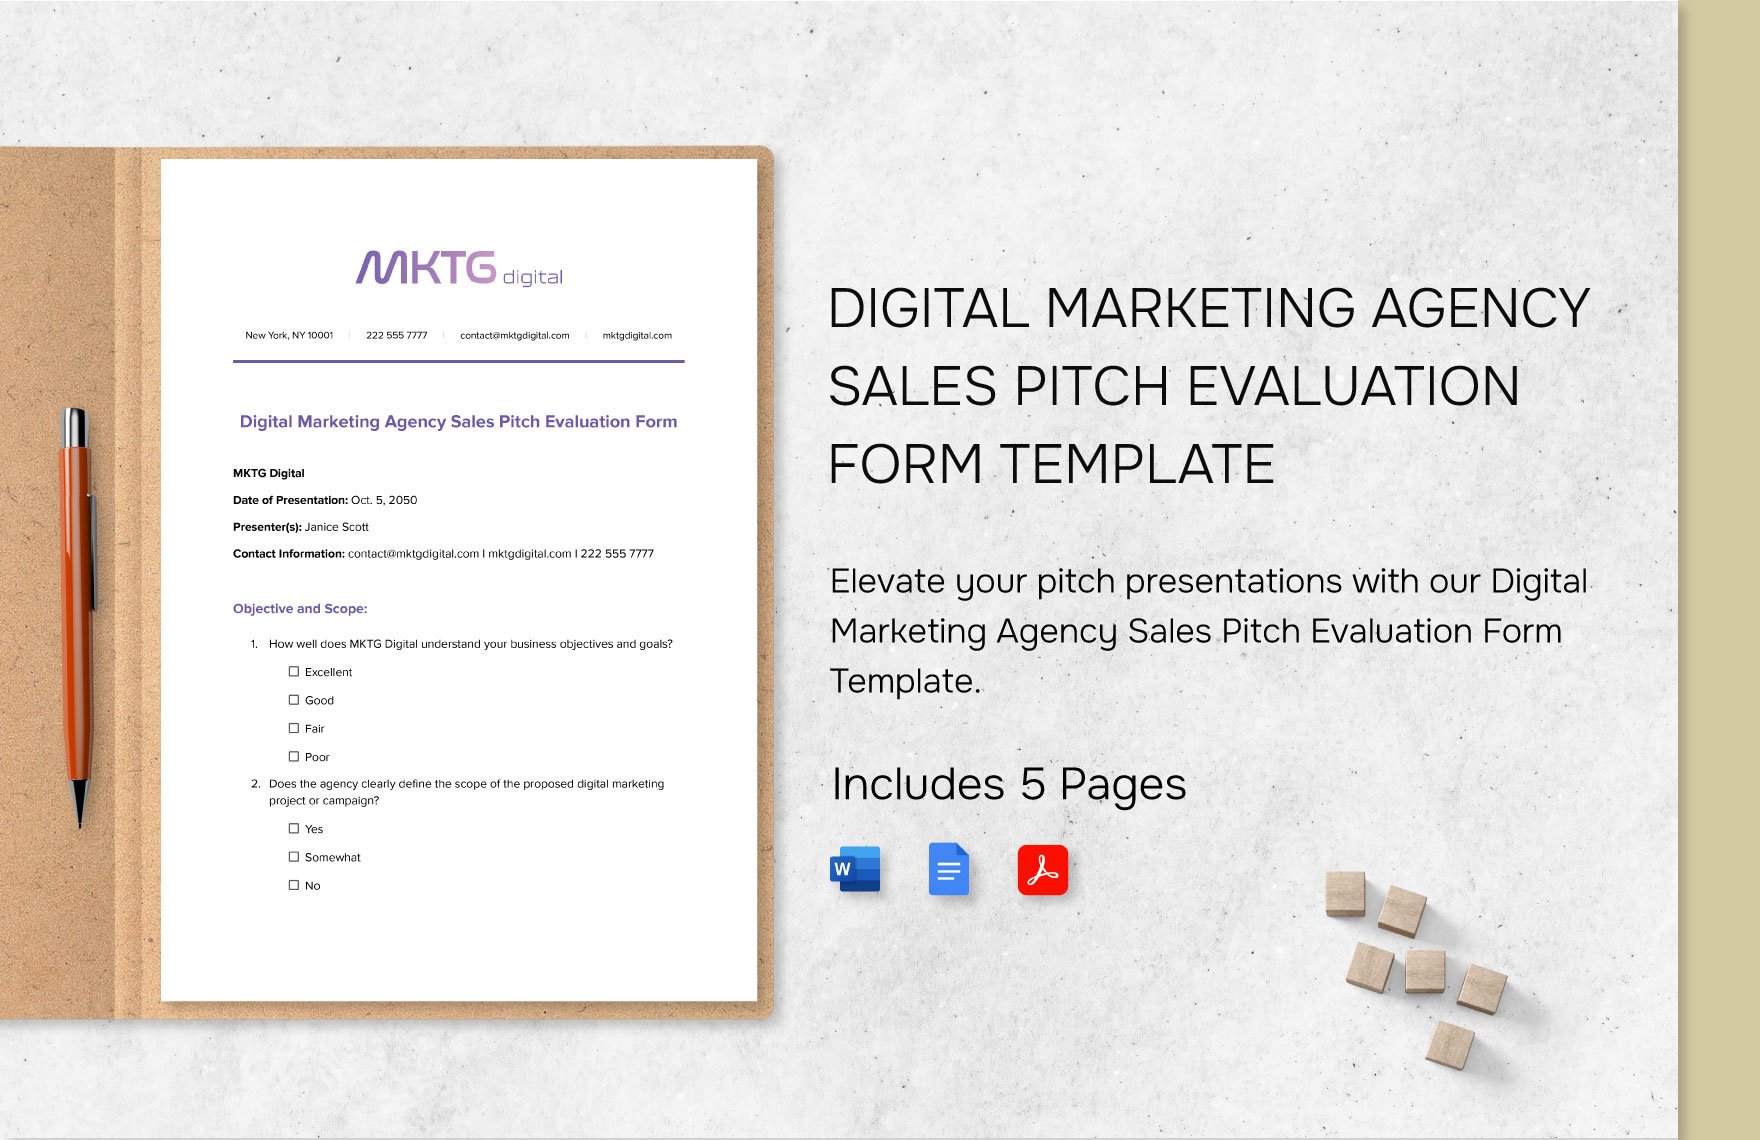 Digital Marketing Agency Sales Pitch Evaluation Form Template in Word, Google Docs, PDF